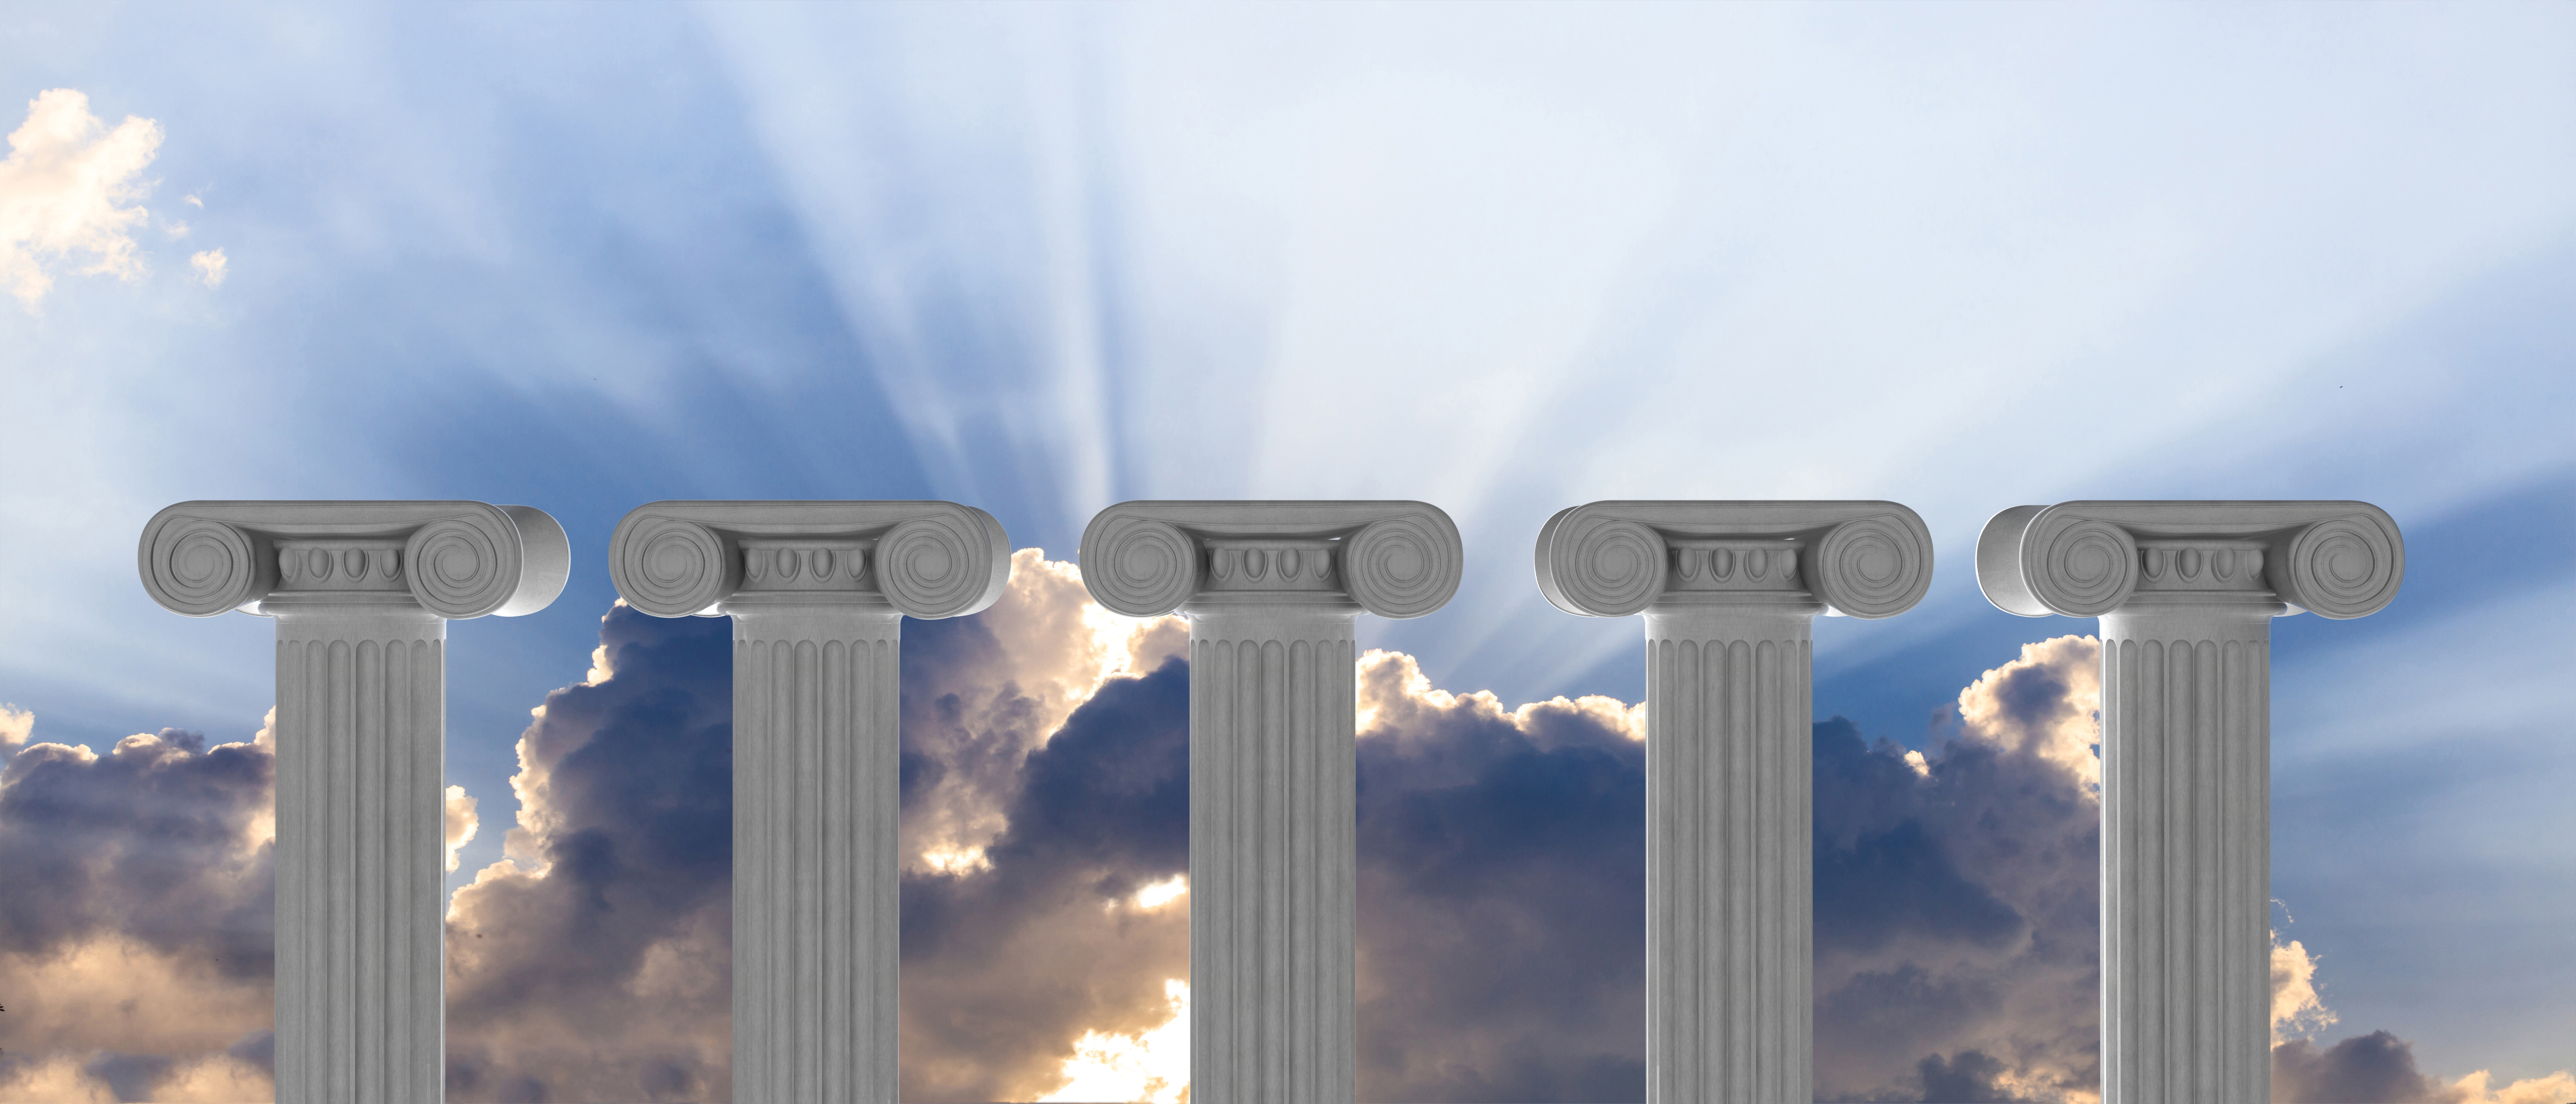 The Five Pillars of Ethical Business Leadership